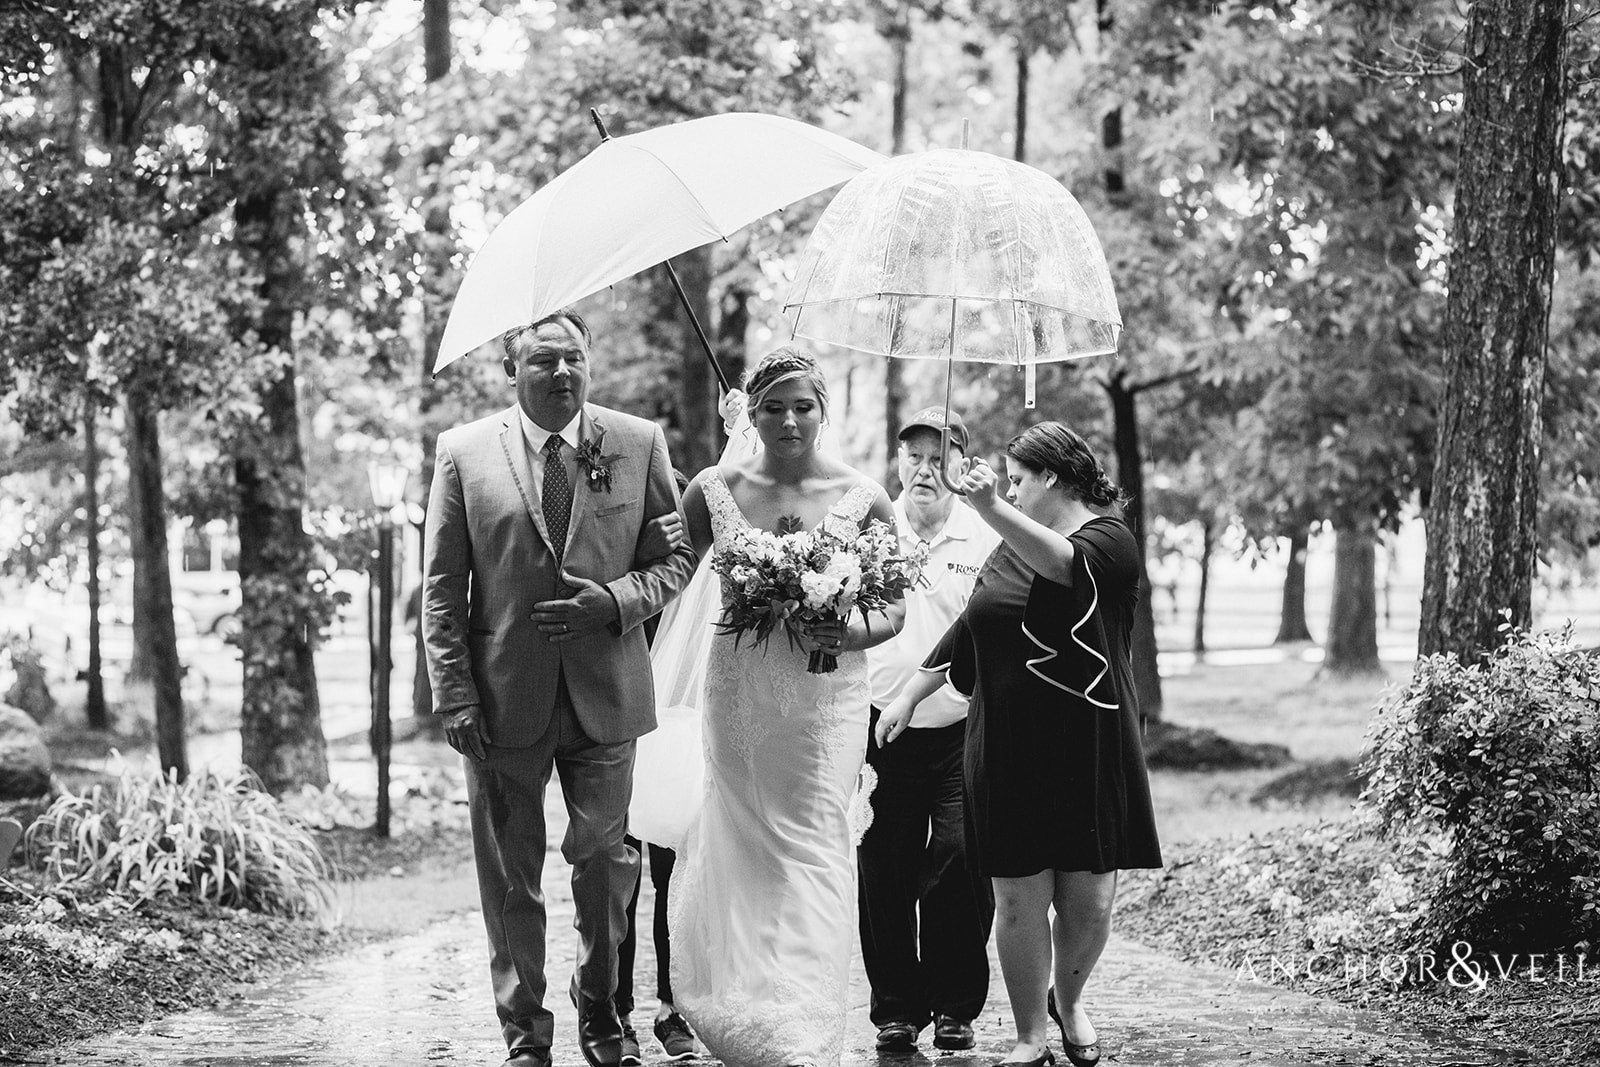 The rain couldn't keep the Bride from walking down the isle at The Farm at Brusharbor Wedding